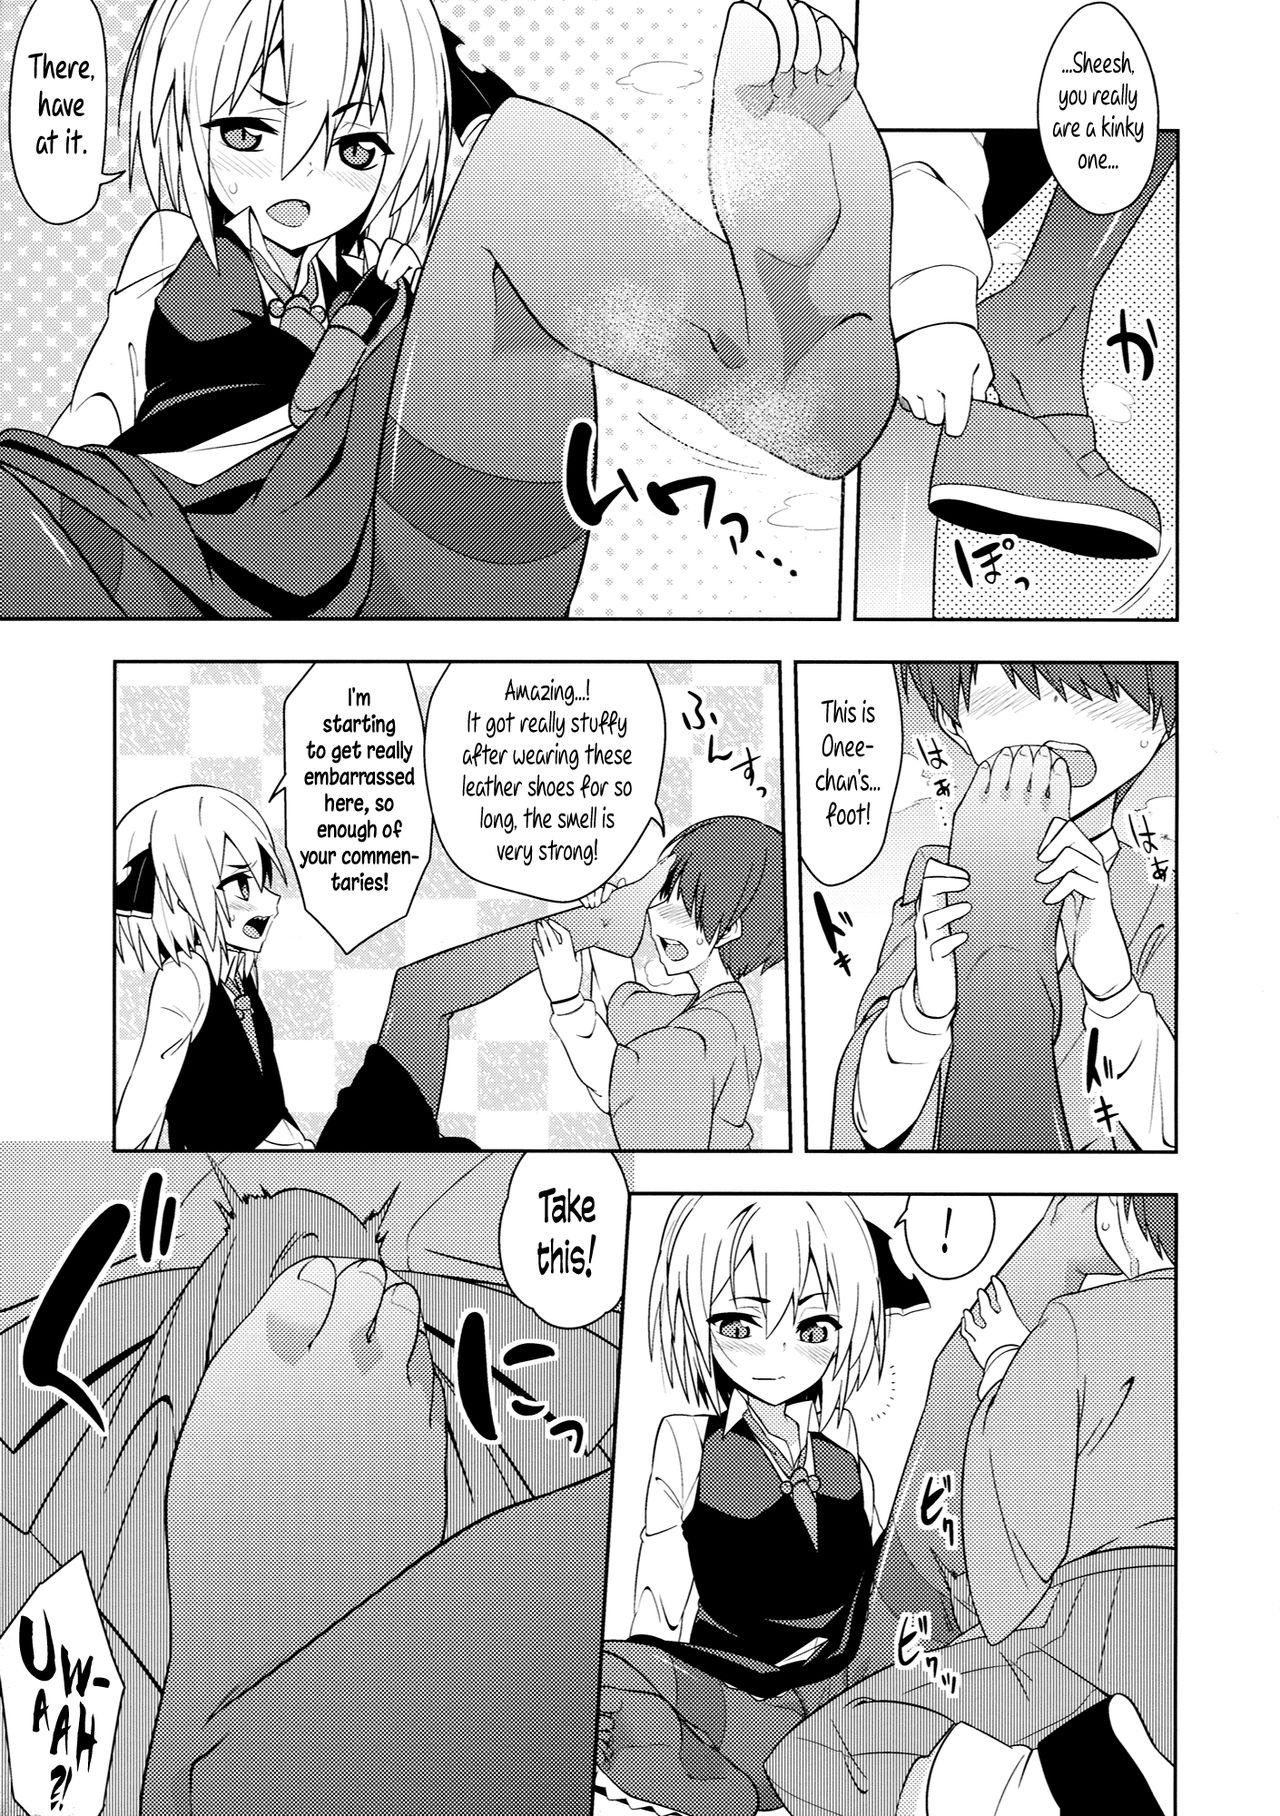 Uncensored Rumia Aratta？| Have you washed, Rumia? - Touhou project Doggy Style Porn - Page 6